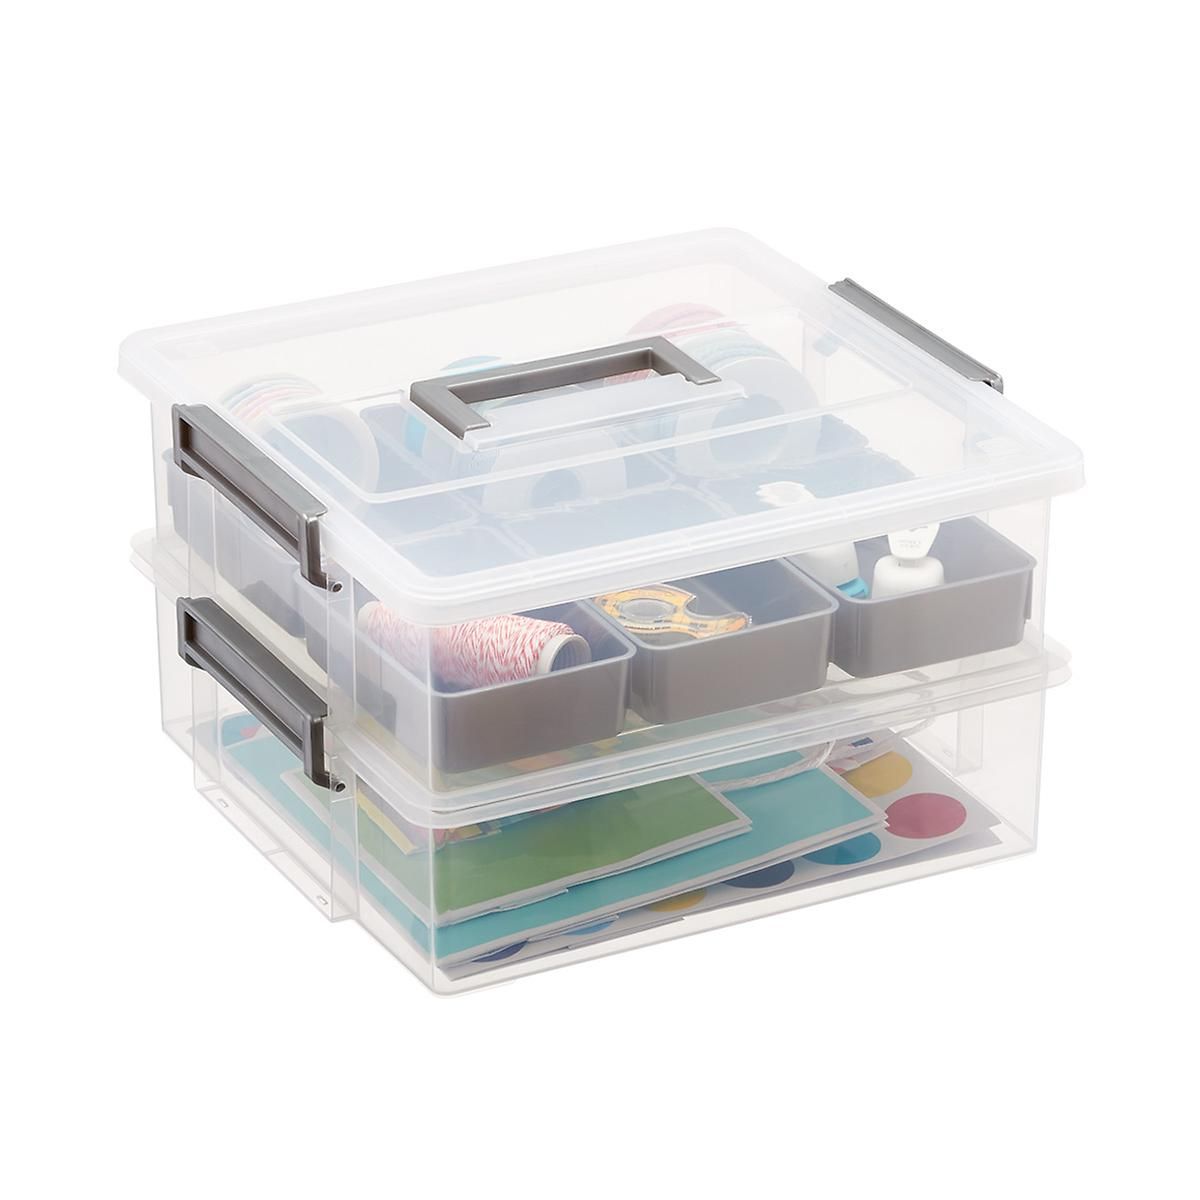 2-Layer Gift Packaging Organizer | The Container Store